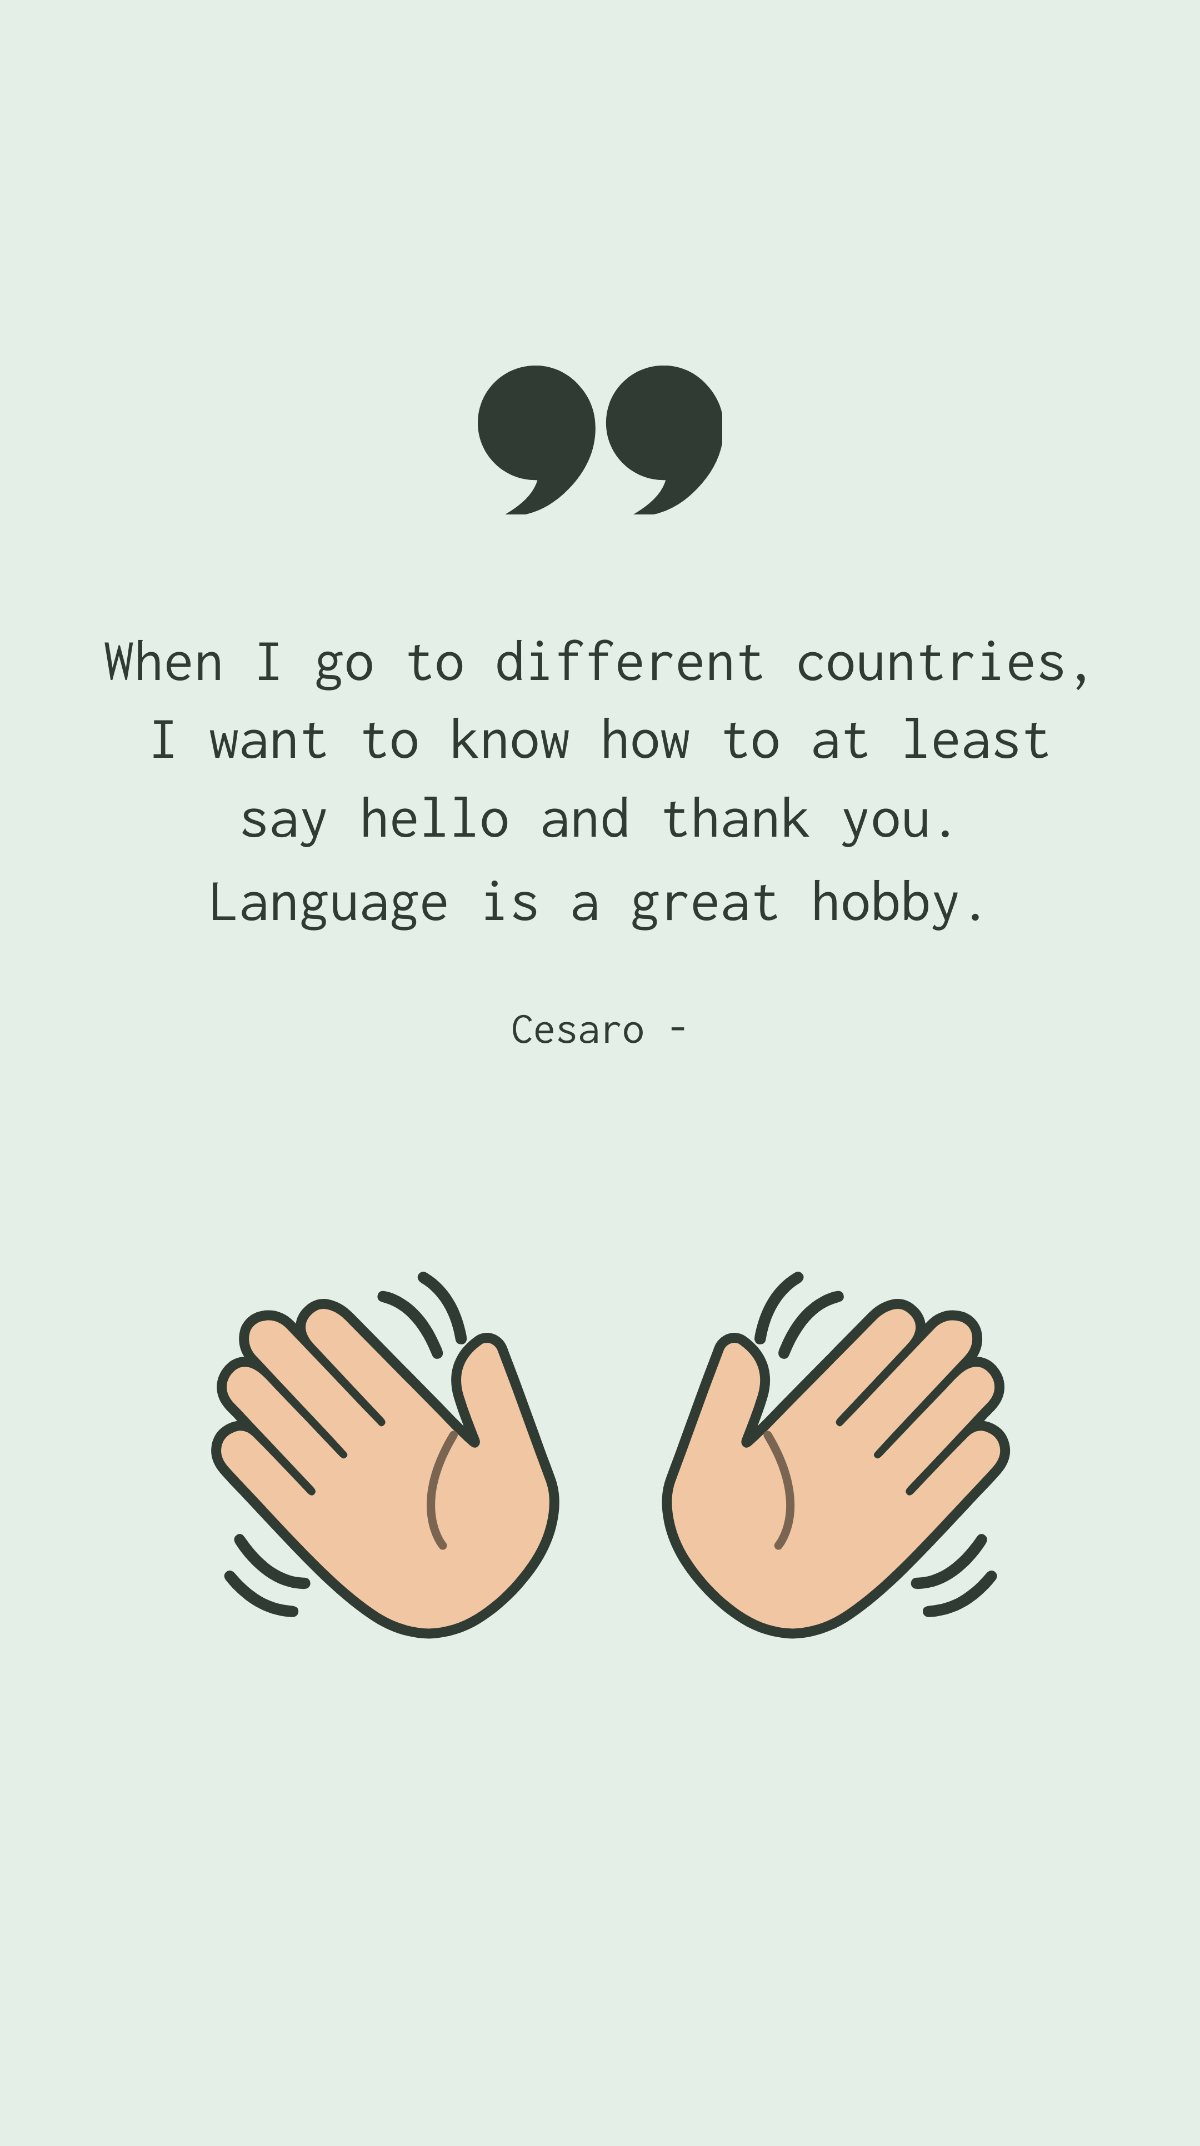 Free Cesaro - When I go to different countries, I want to know how to at least say hello and thank you. Language is a great hobby. Template